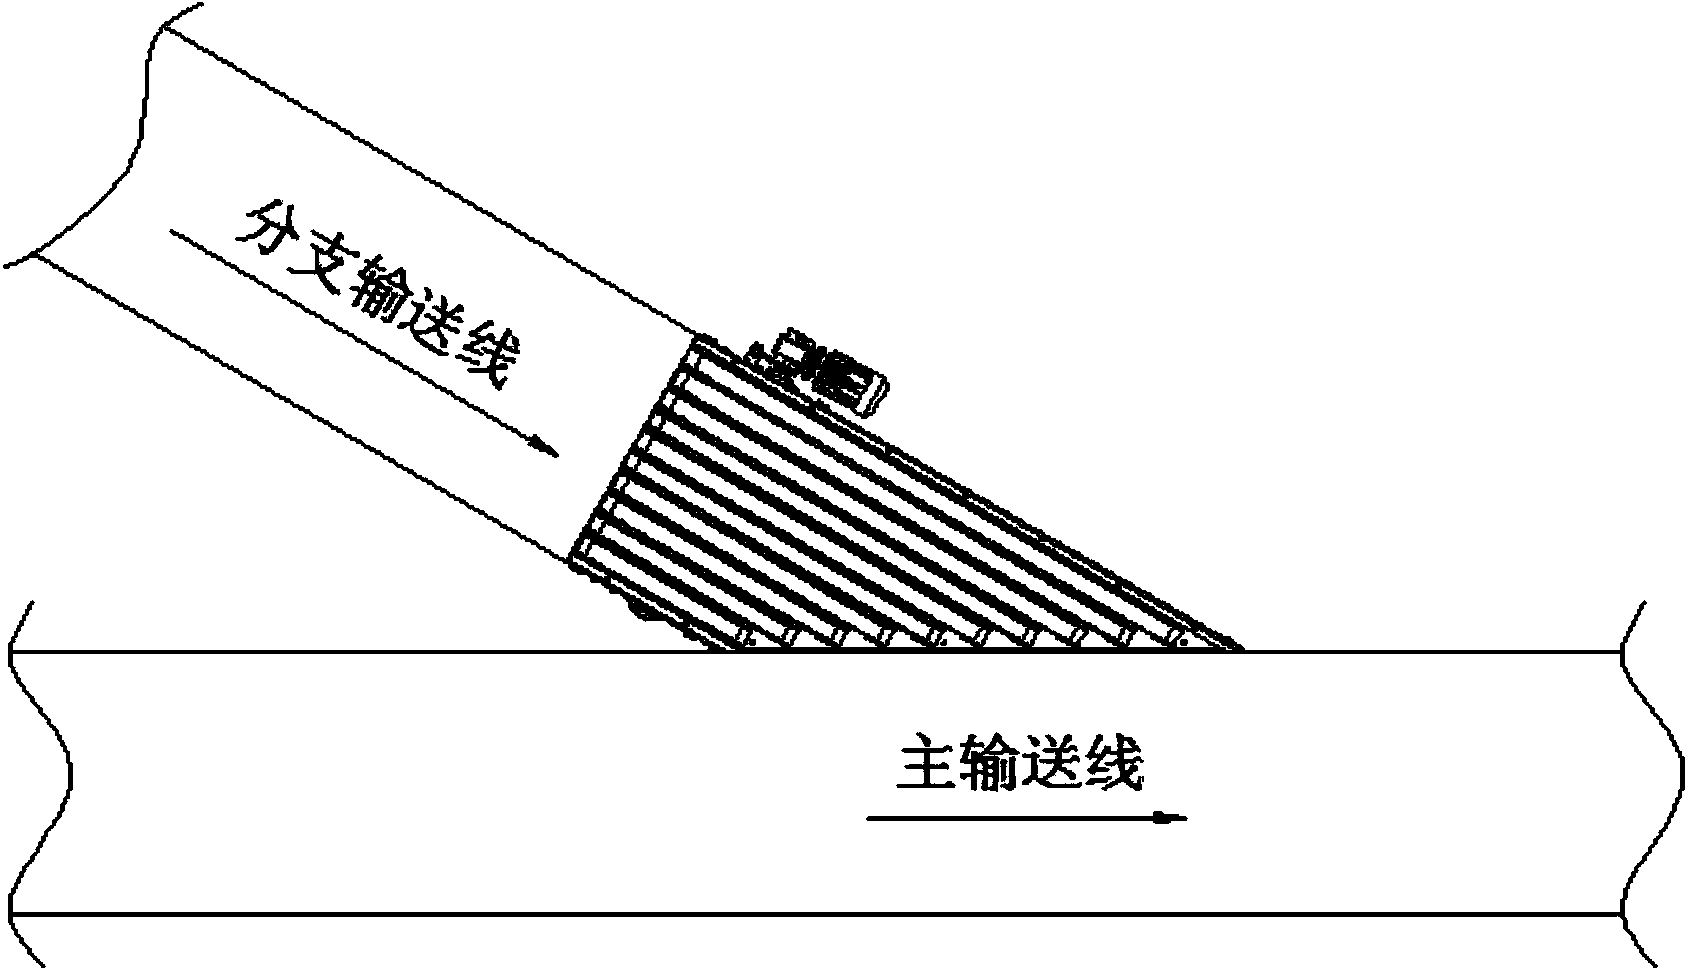 Centering mechanism for narrow-band flow-merging machine end portion roller